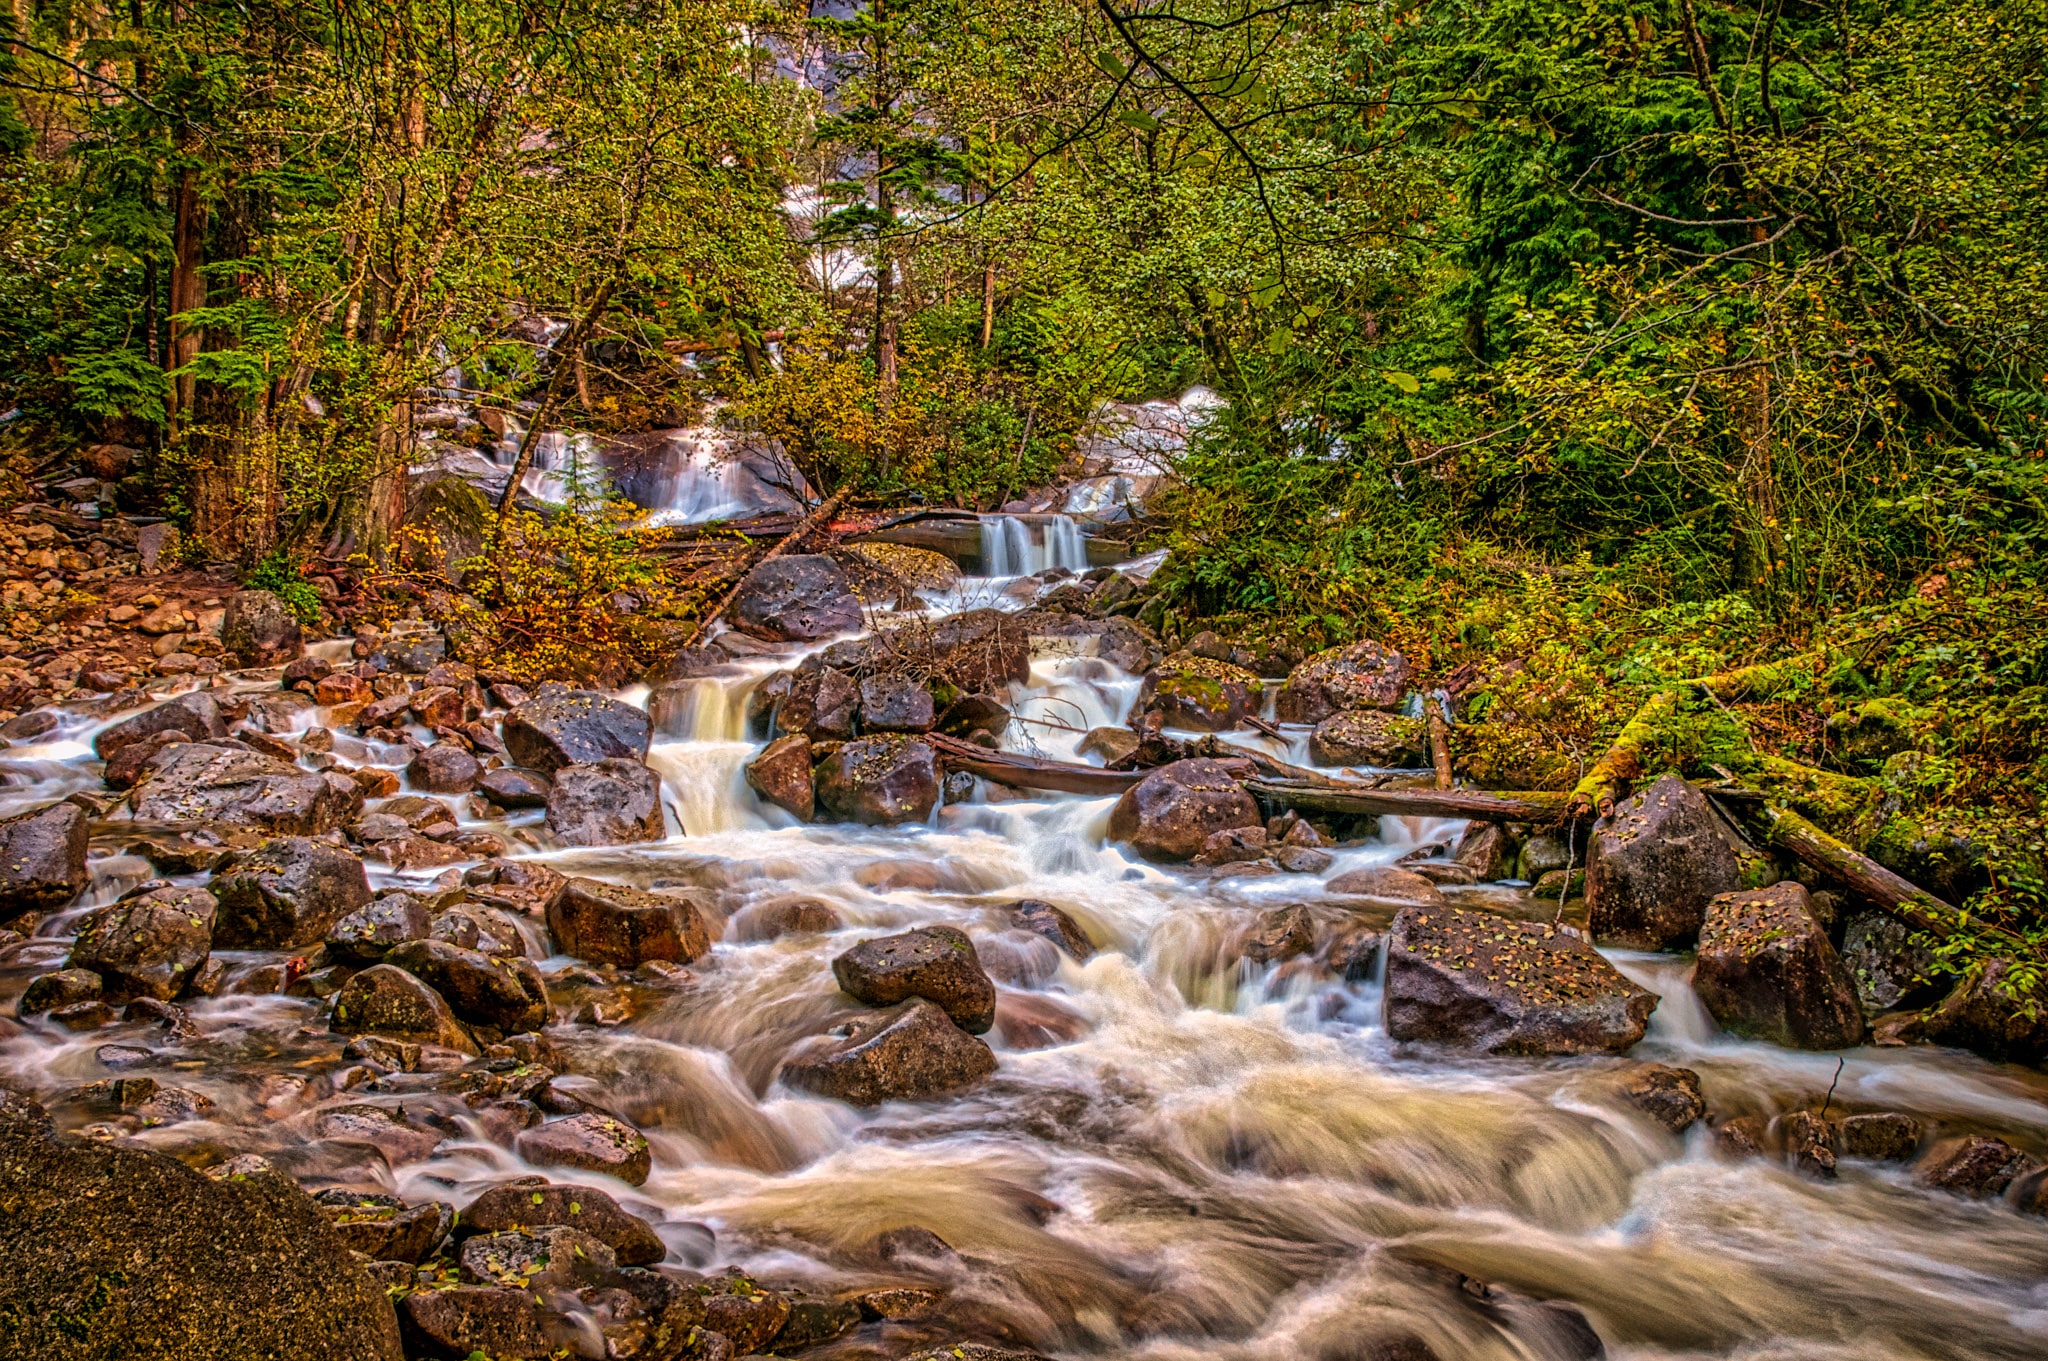 A view of the cascades along Shannon Creek, fed by Lukas Falls, in Shannon Falls Provincial Park along the Sea-to-Sky Highway along the British Columbia coast in Canada.